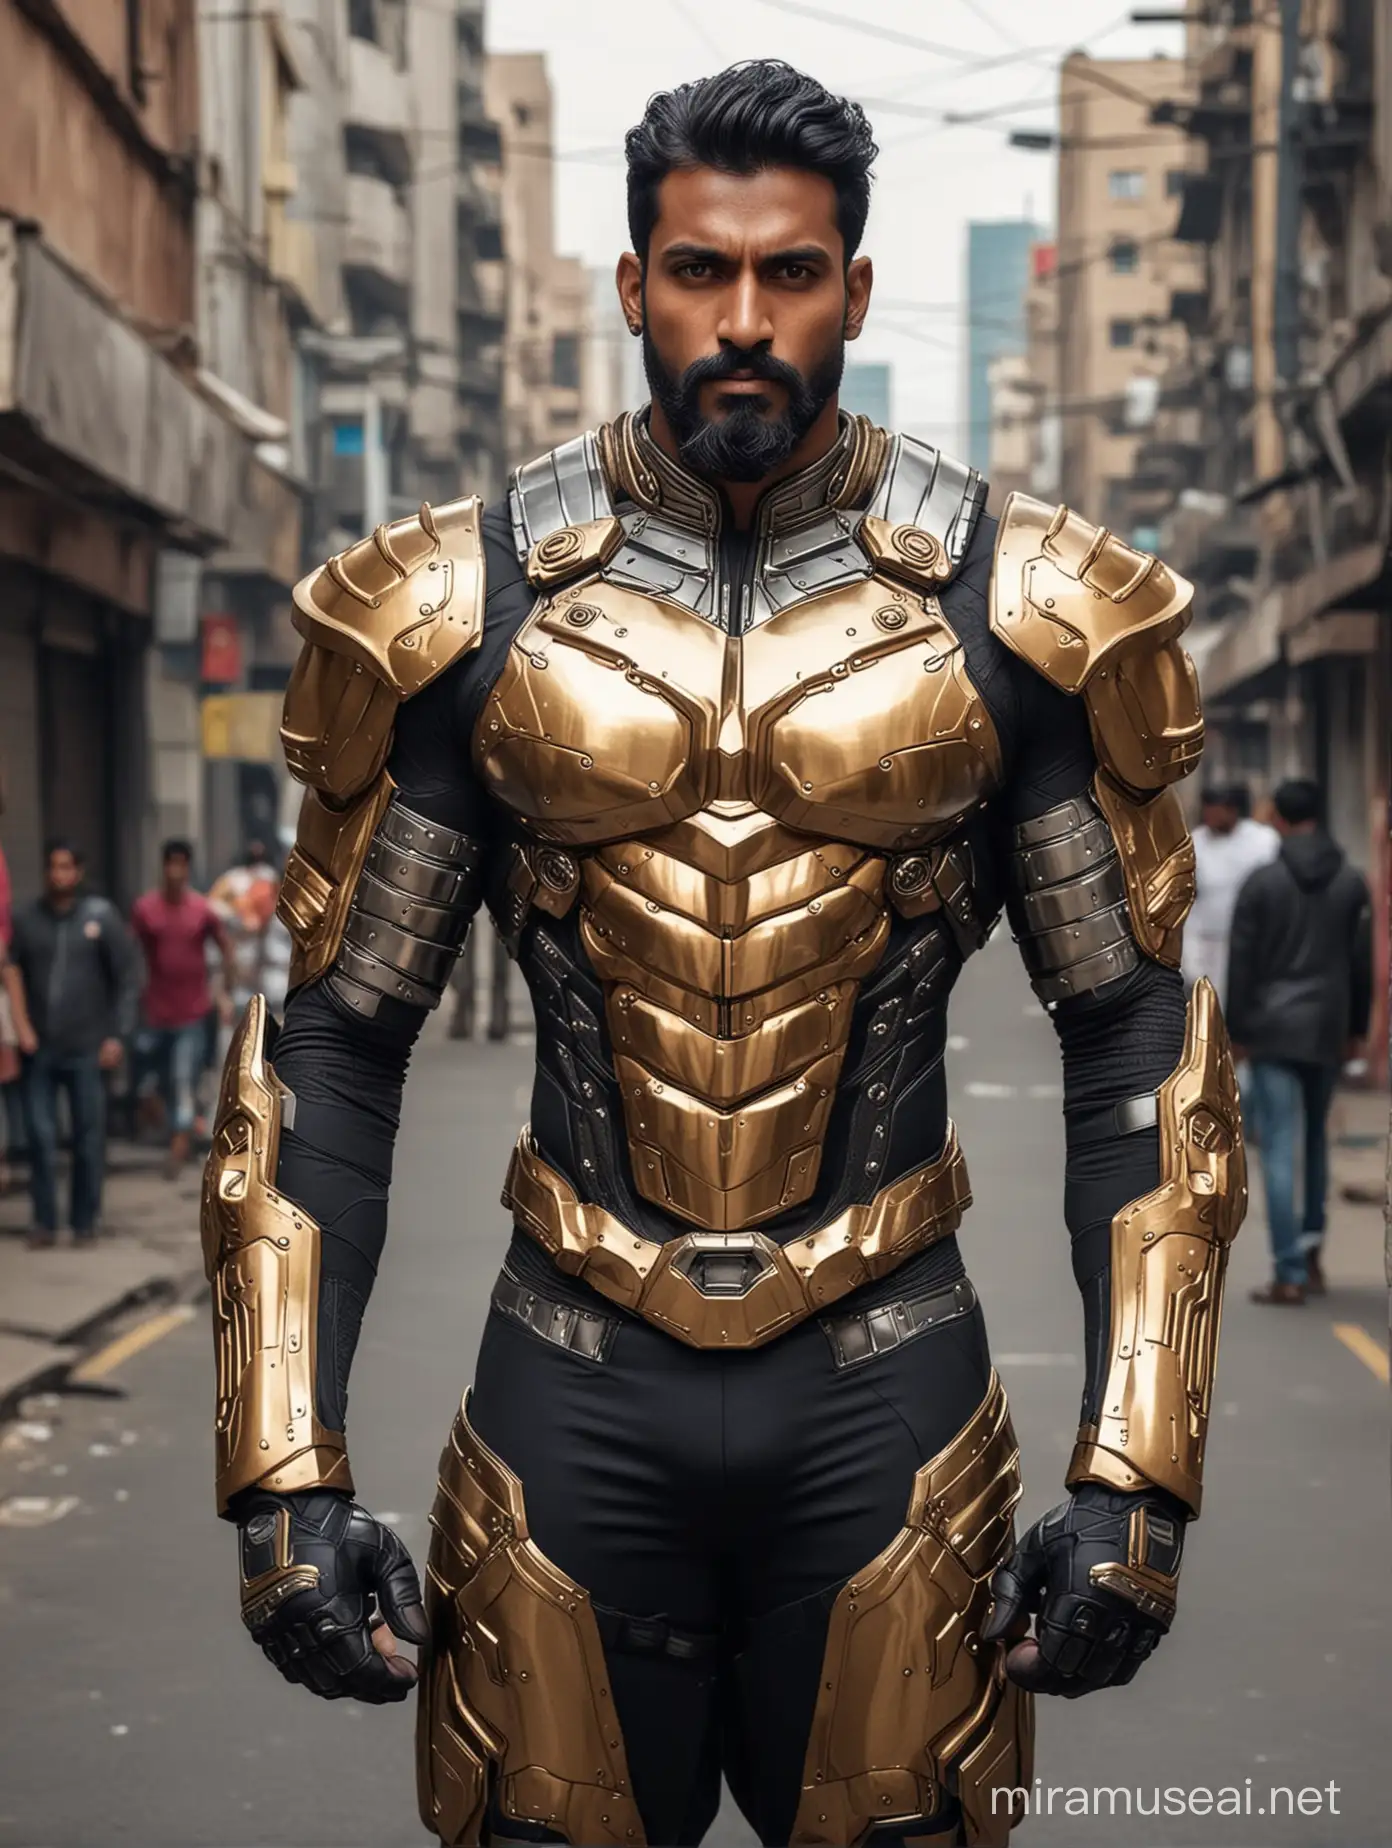 Indian Bodybuilder in SciFi High Tech Armour Suit with Firearms on Street